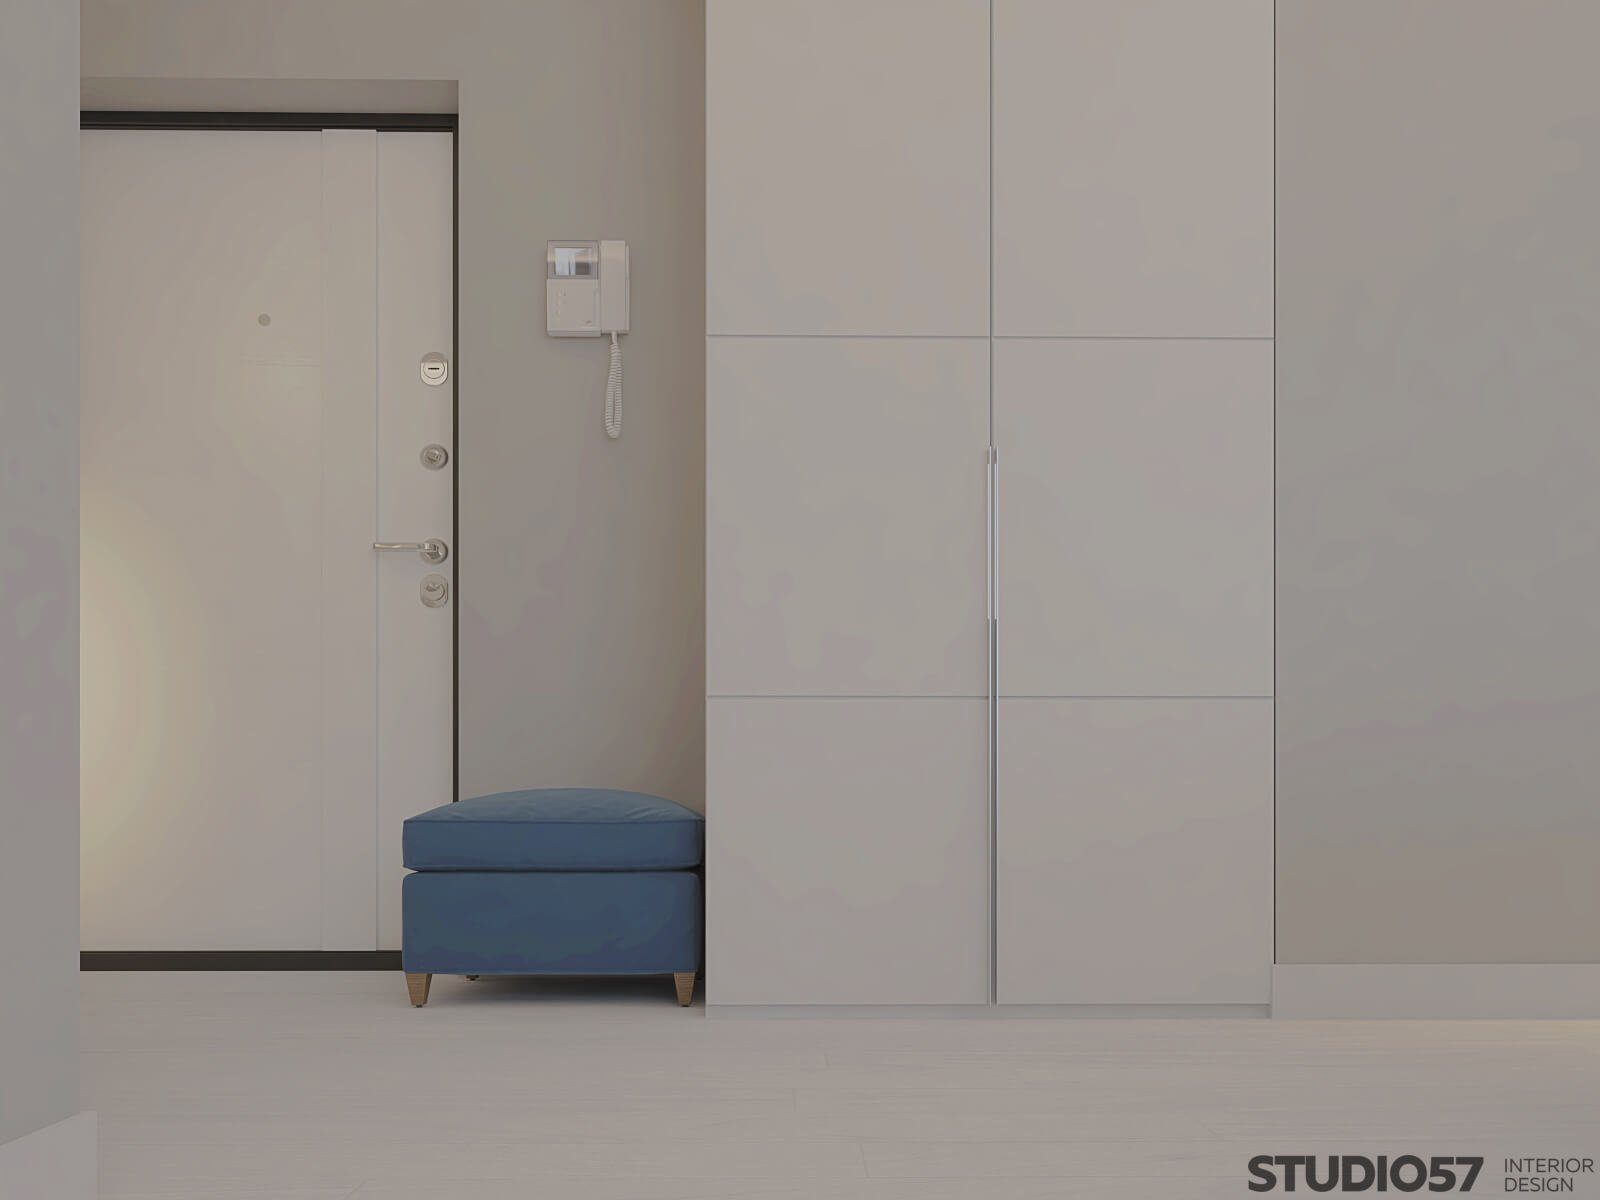 The interior of the hallway in the style of minimalism